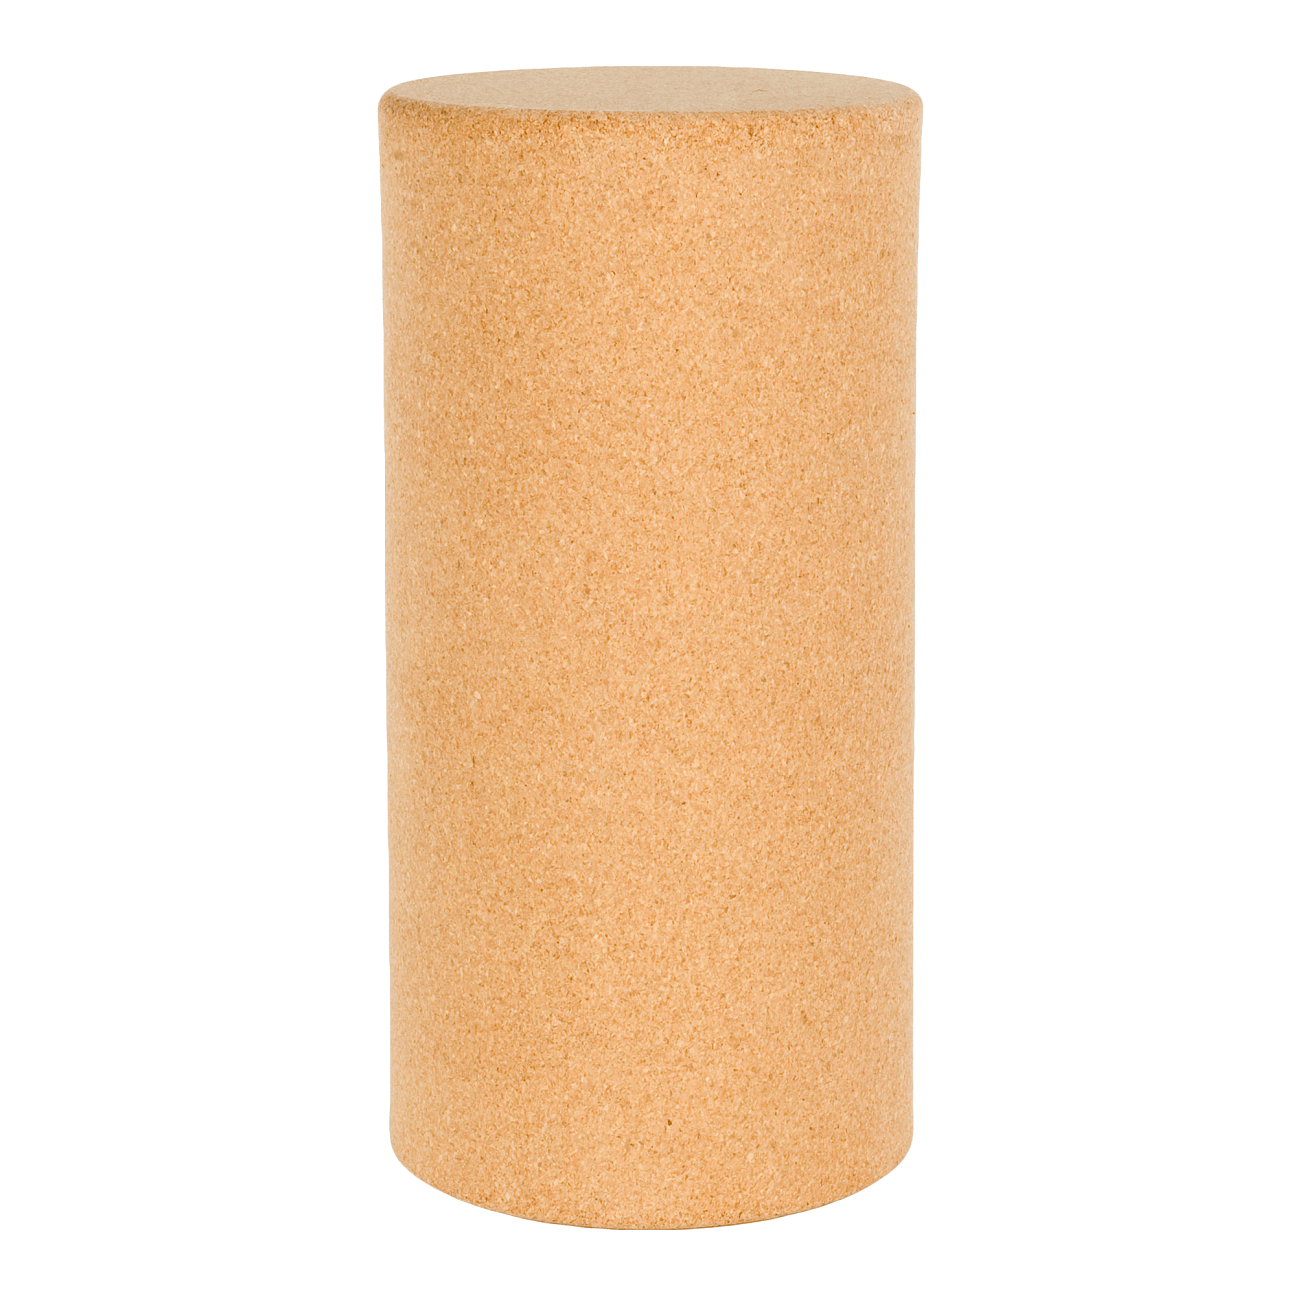 Front view of a cork yoga cylinder standing up on its flat edge.